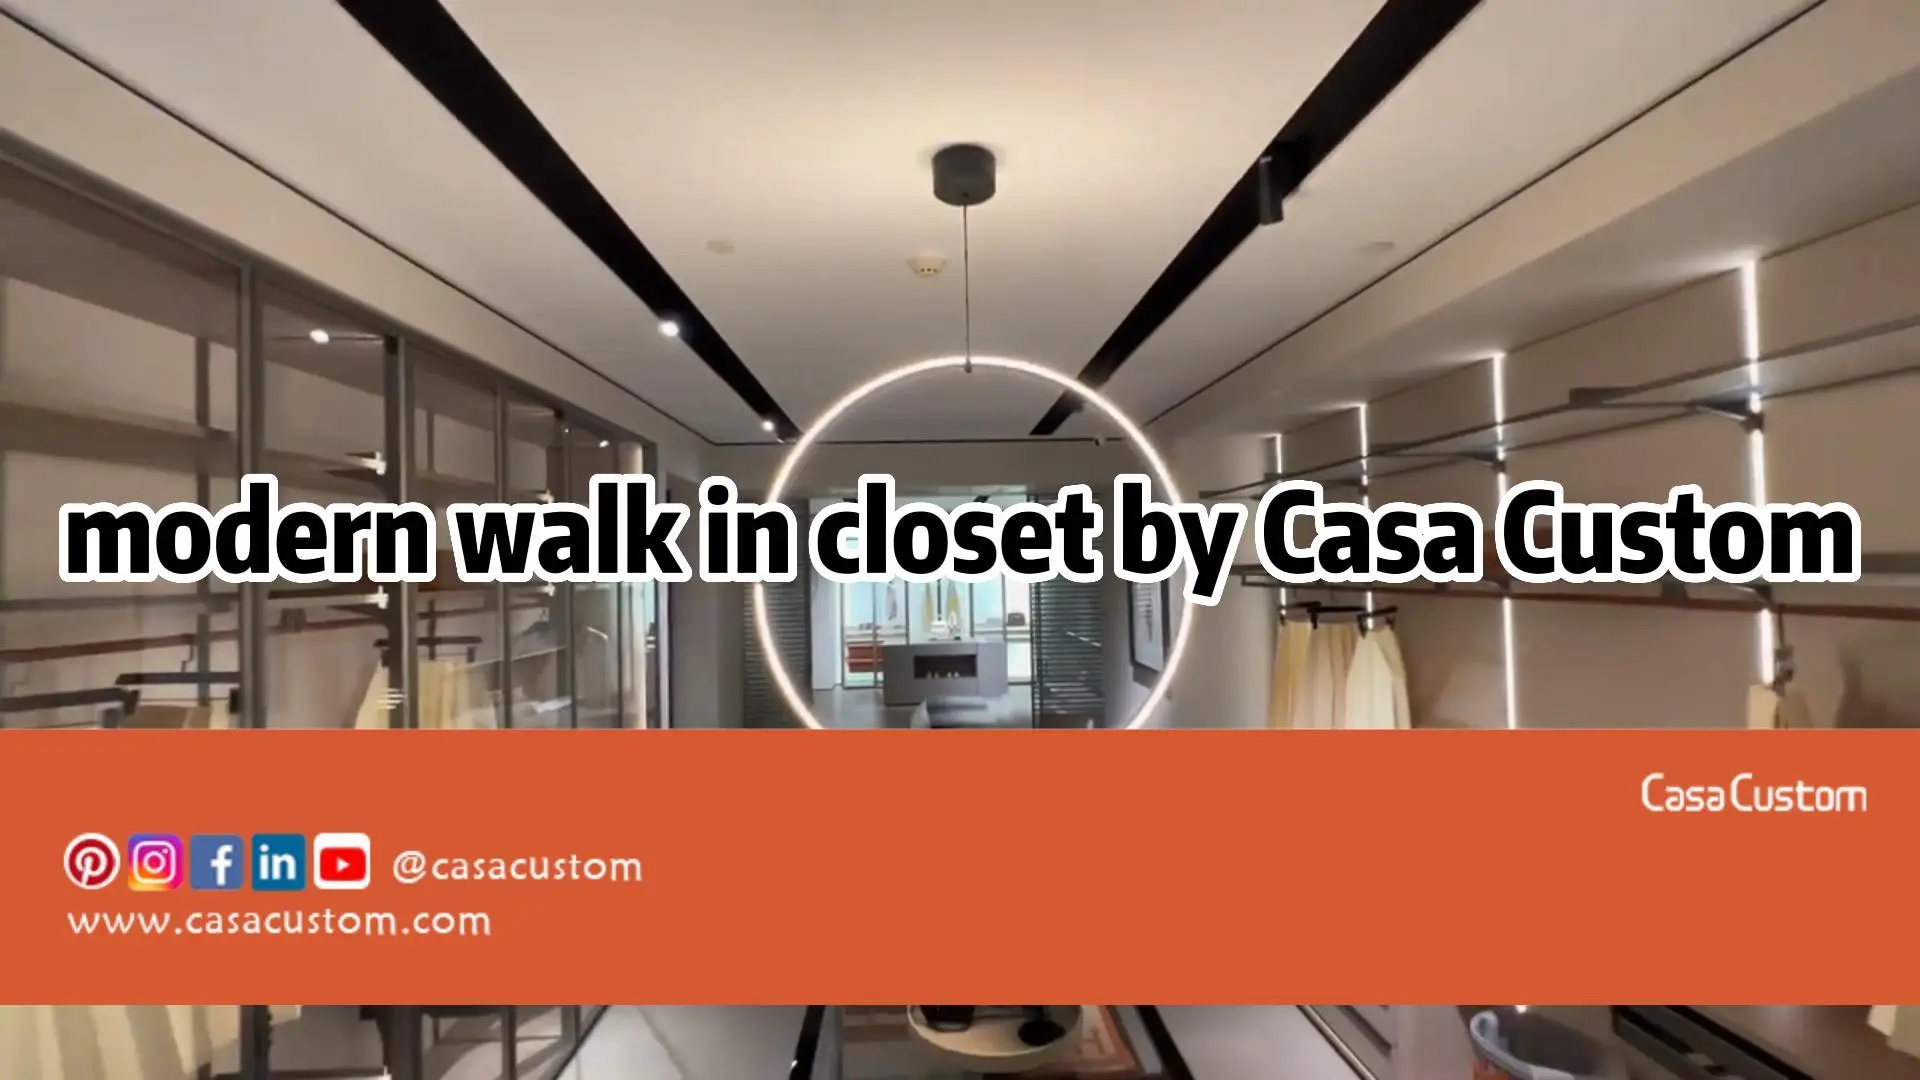 The modern walk in closet by Casa Custom offers a luxurious and stylish storage solution.